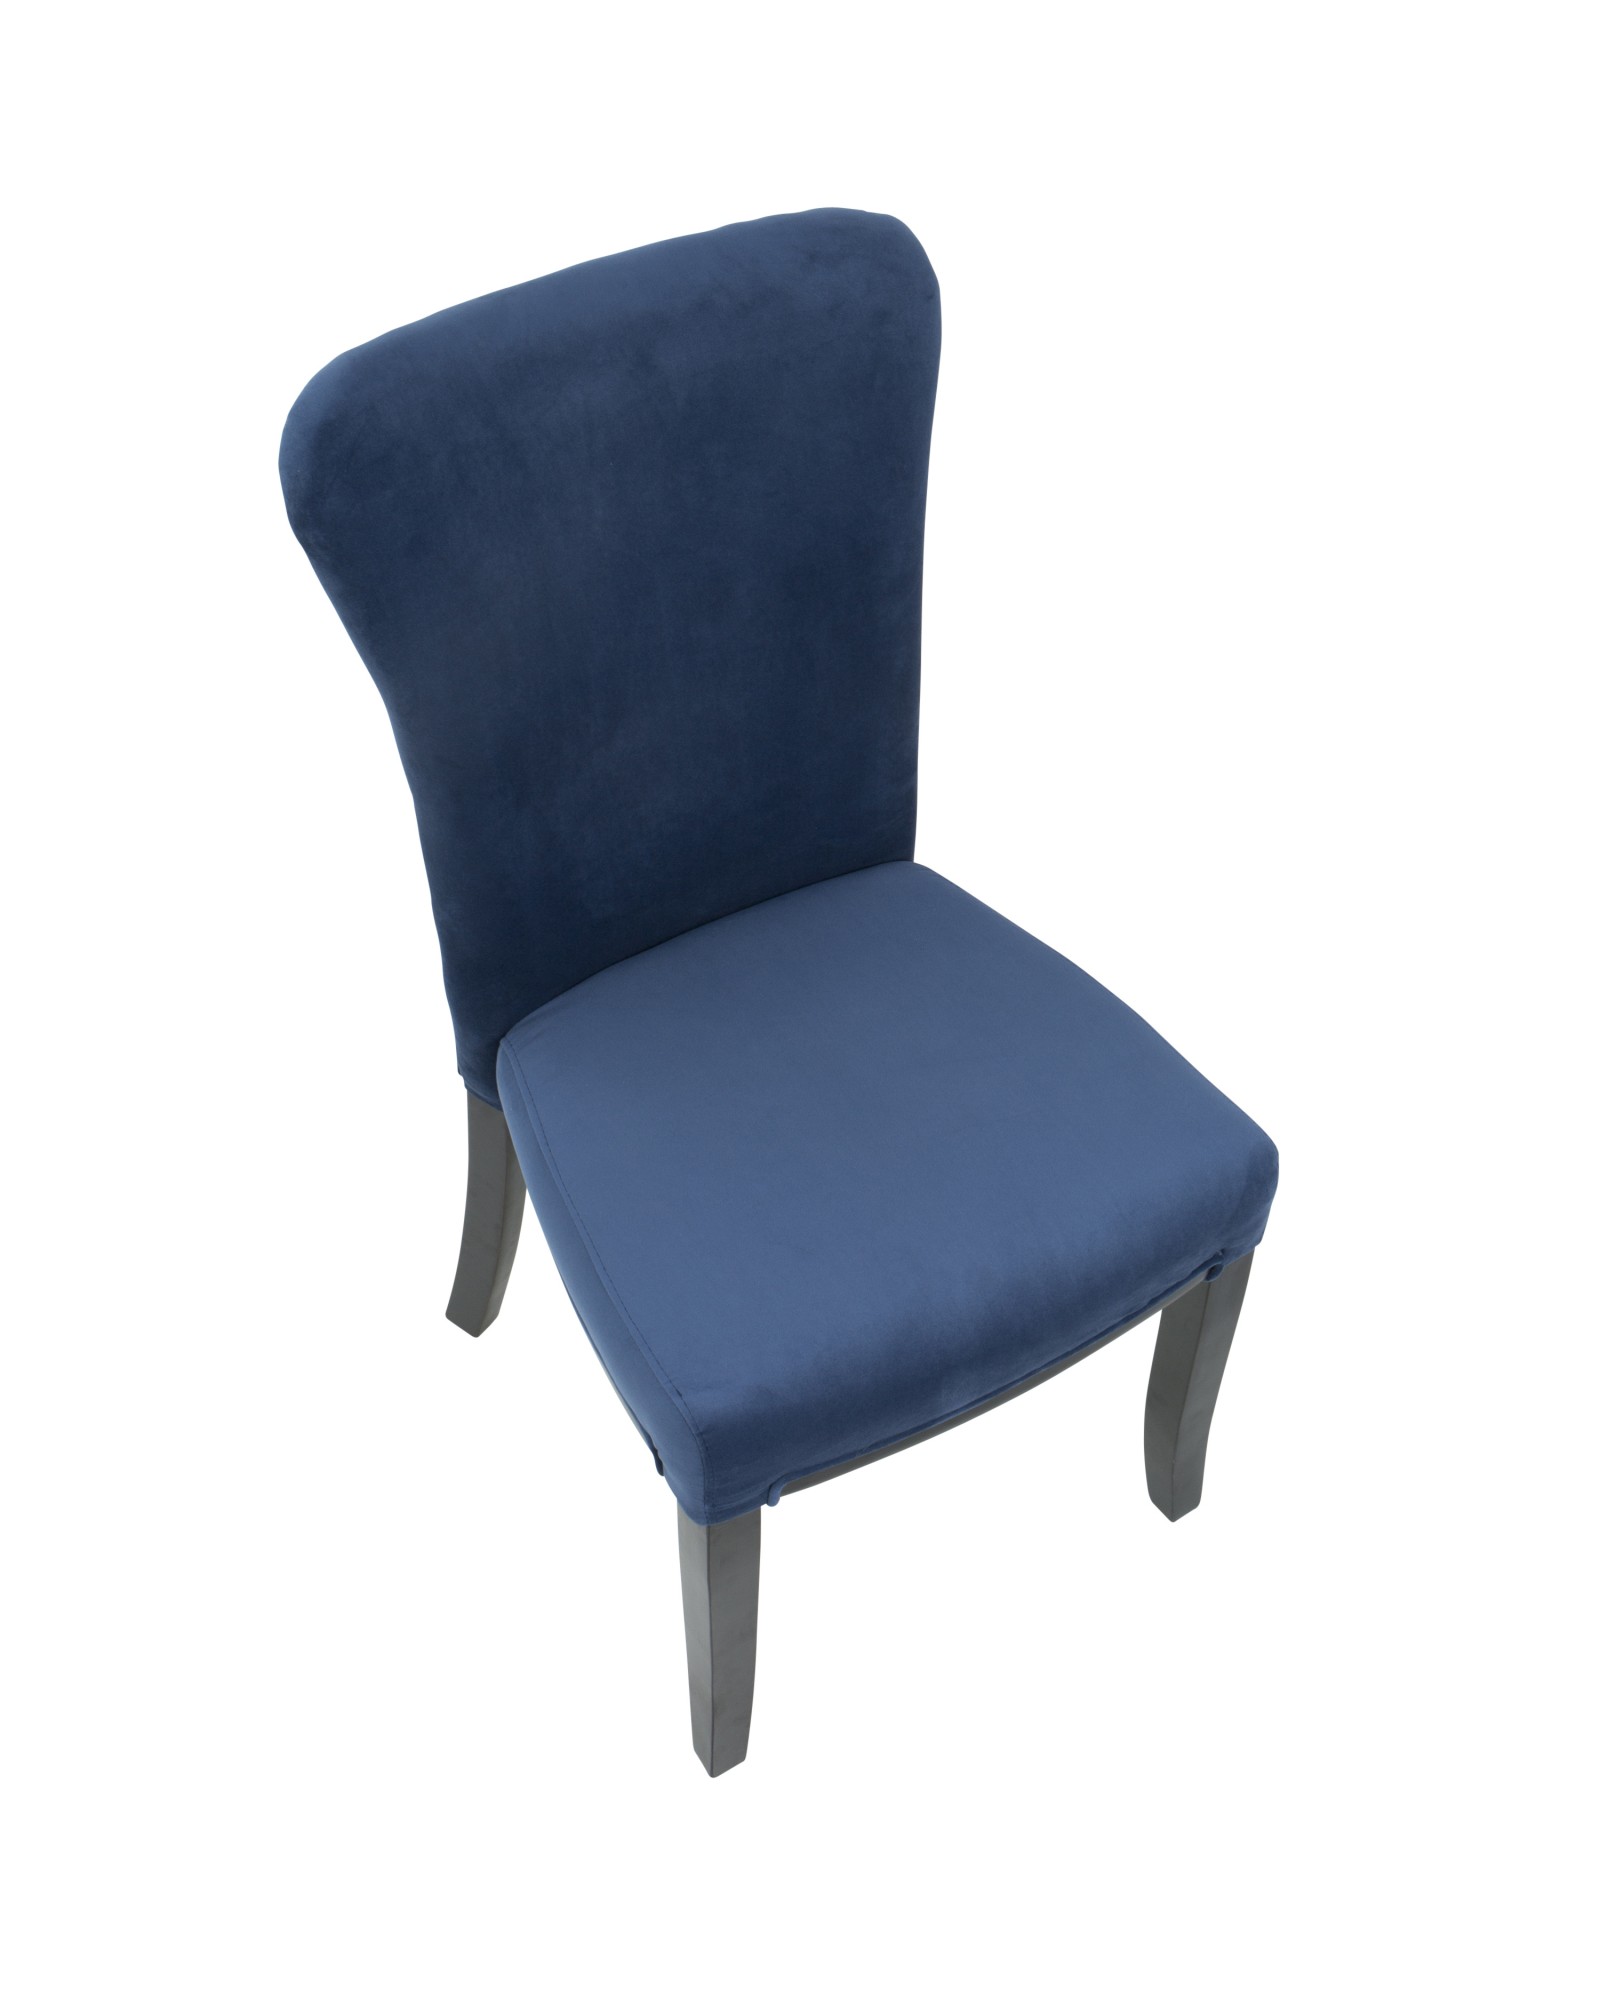 Olivia Contemporary Dining Chair in Espresso Wood and Navy Blue Velvet - Set of 2